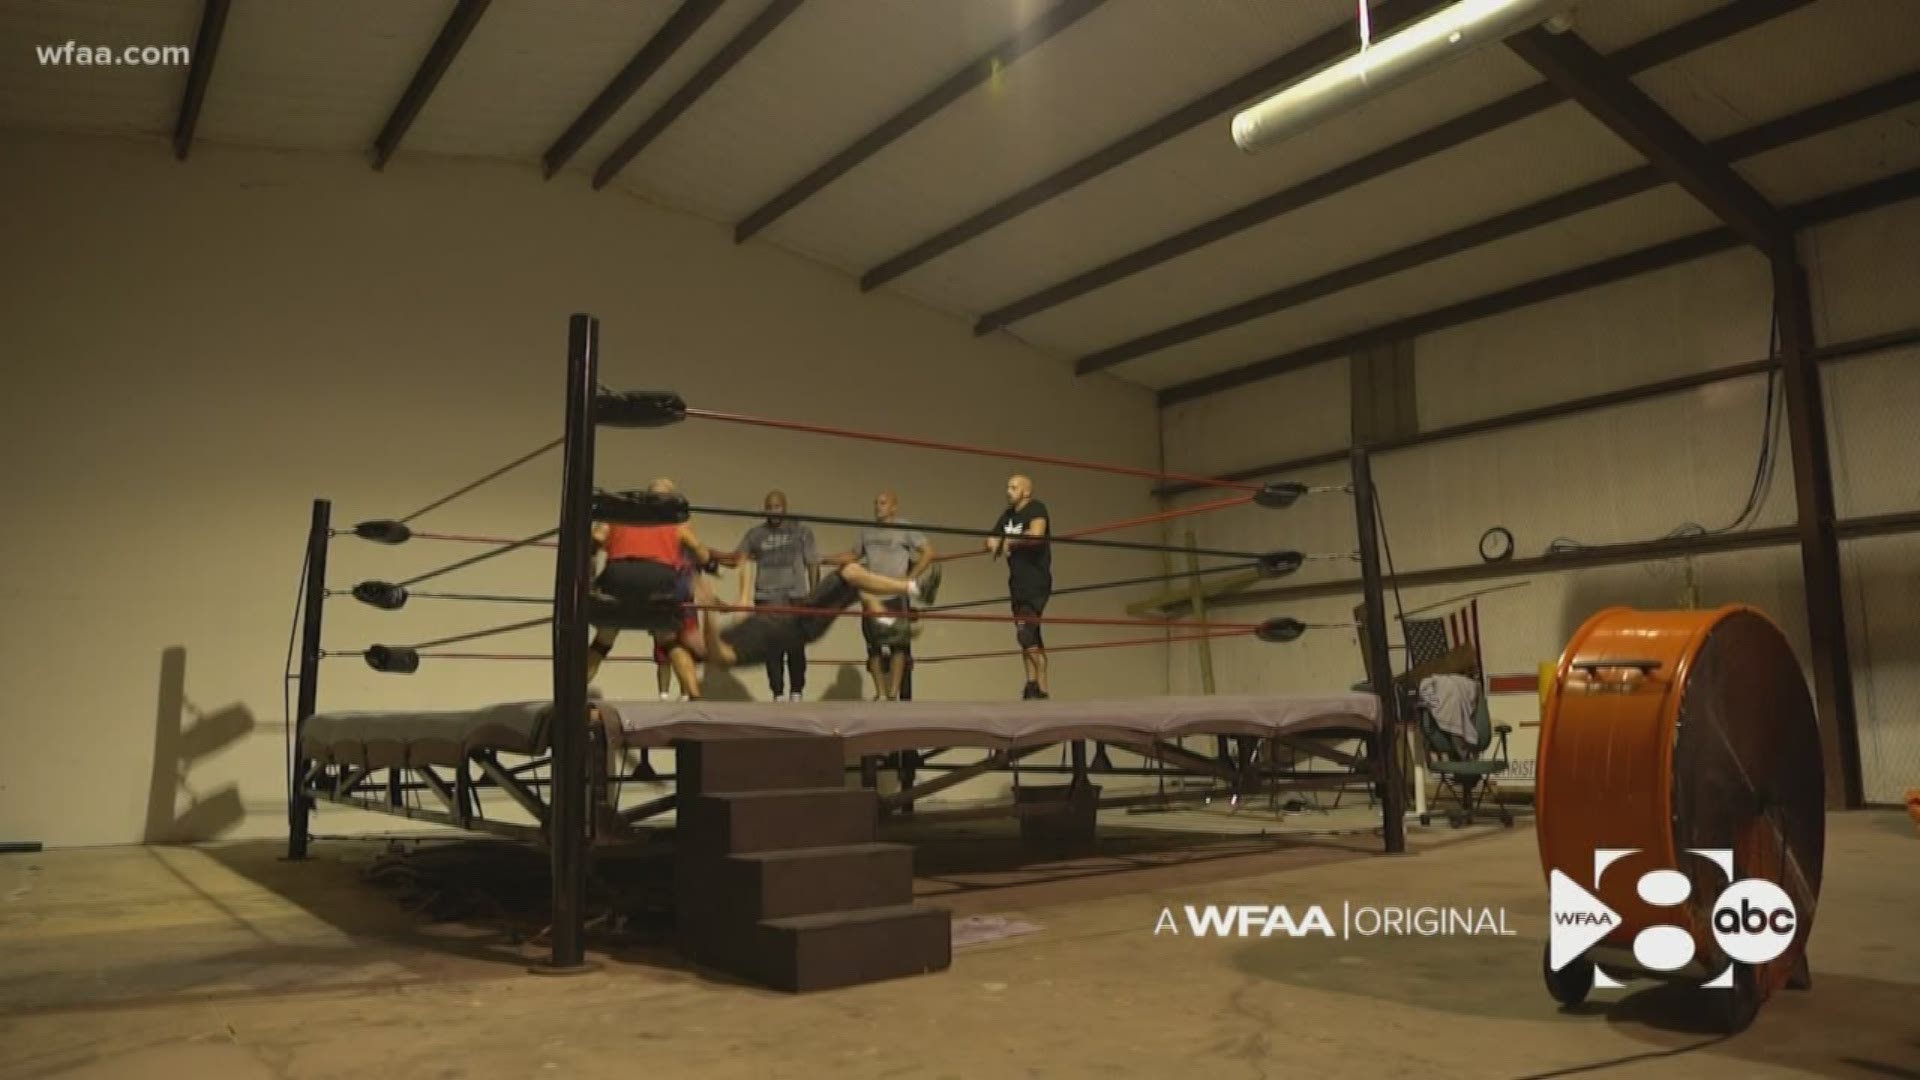 Wrestling for souls: Why these North Texas church-goers are body-slamming for Jesus